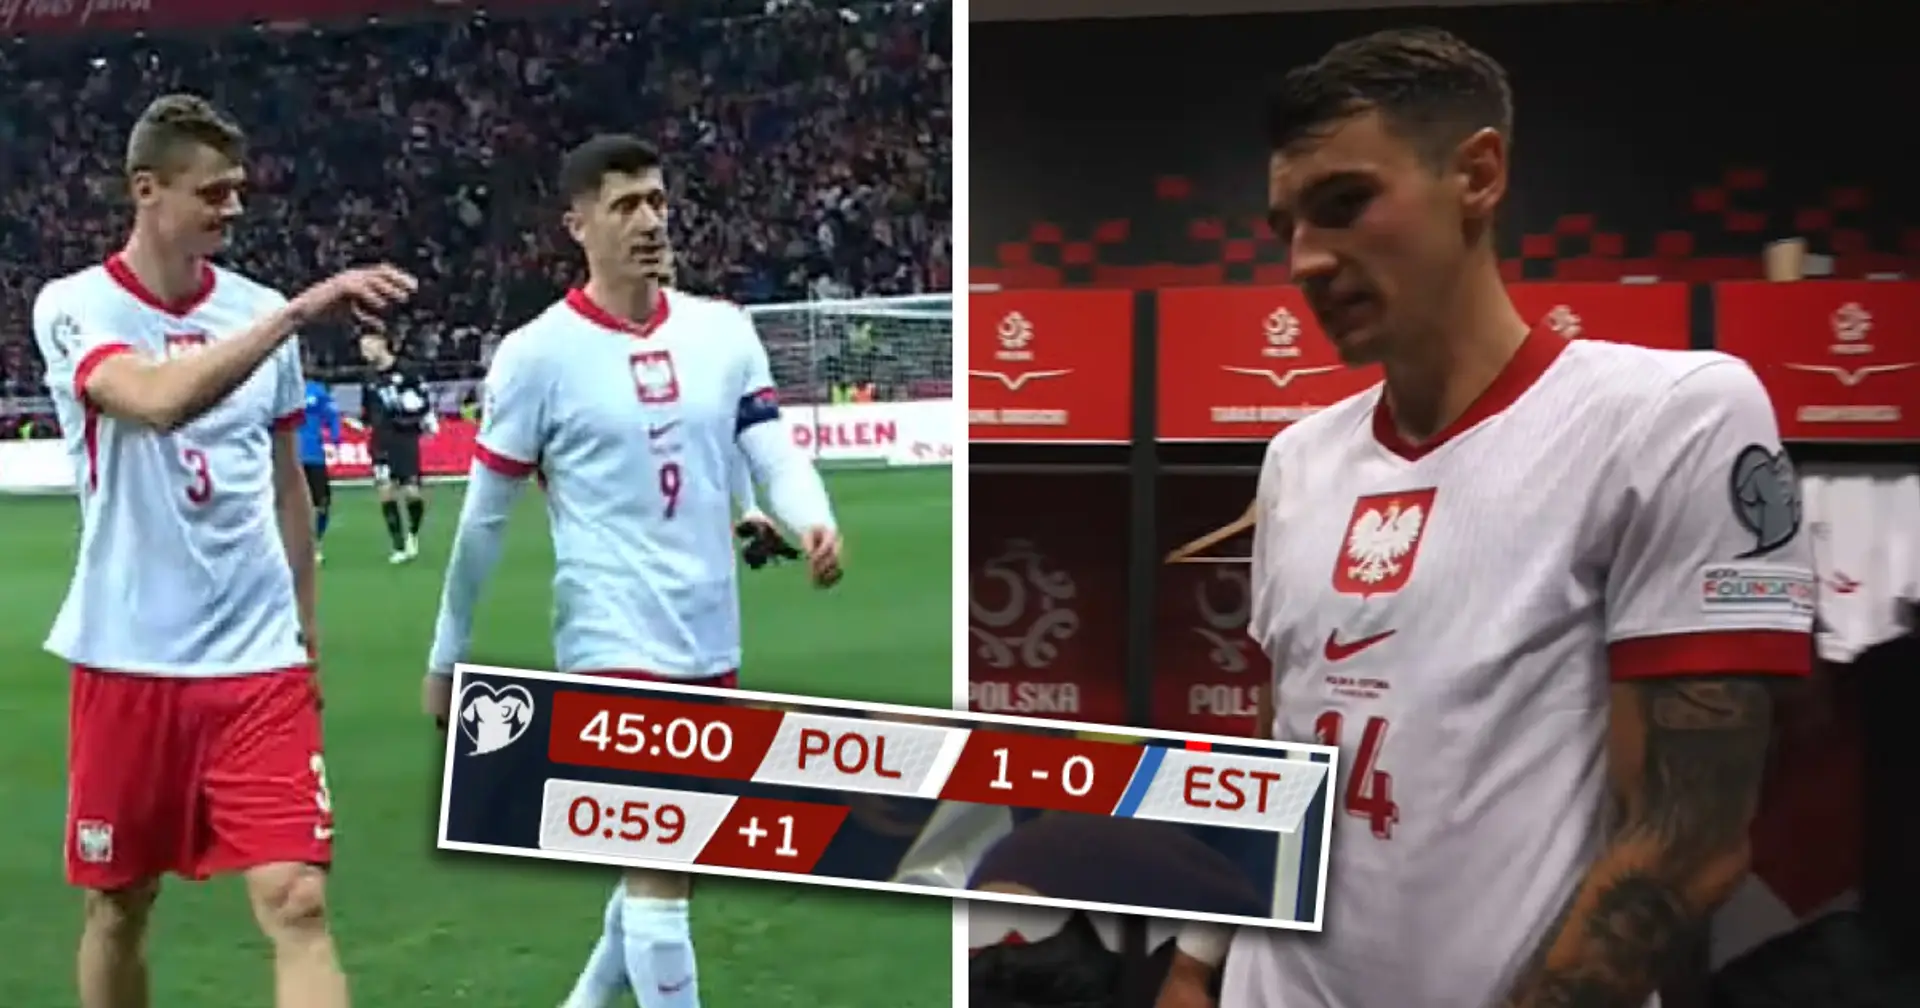 'Let's score 5, k*rwa': Poland scores 5 goals after Kiwior brings Arsenal standards into the dressing room